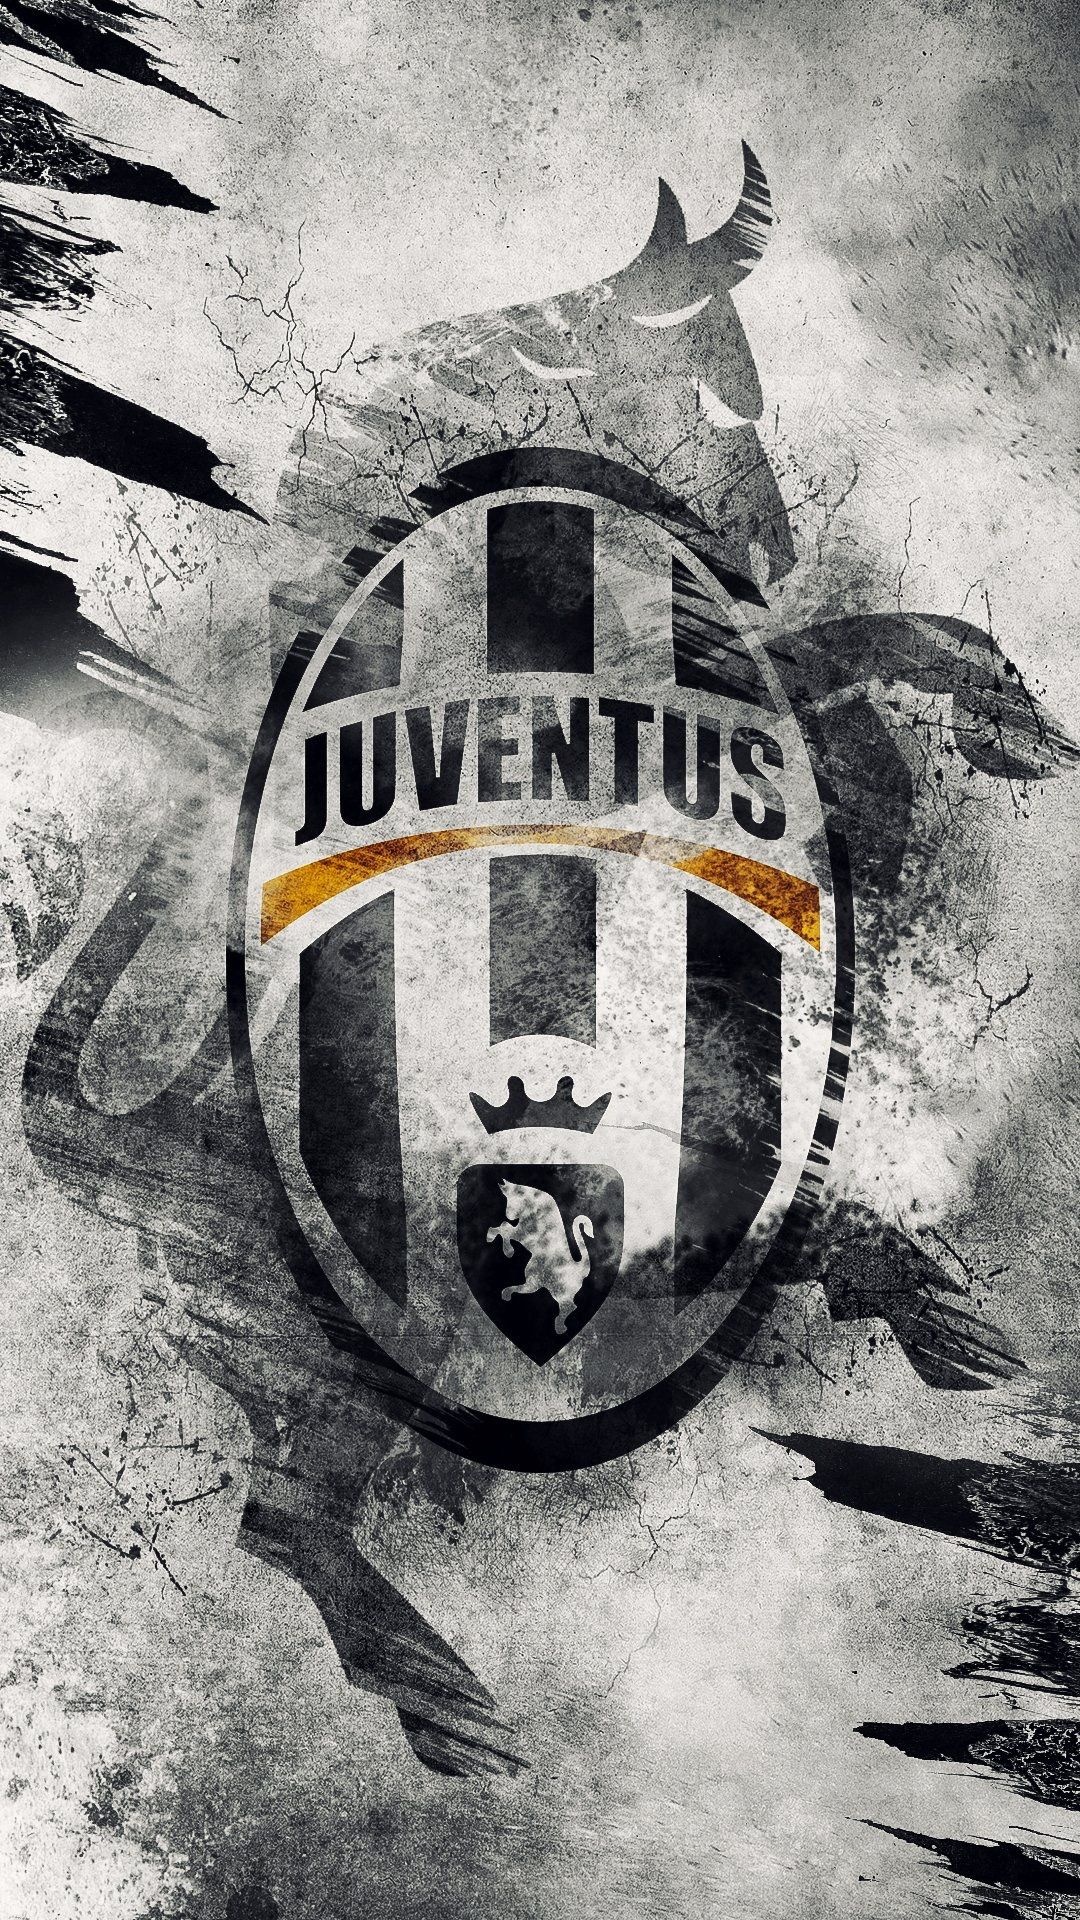 Juventus: The second oldest of its kind still active in the country after Genoa's football section (1893). 1080x1920 Full HD Wallpaper.